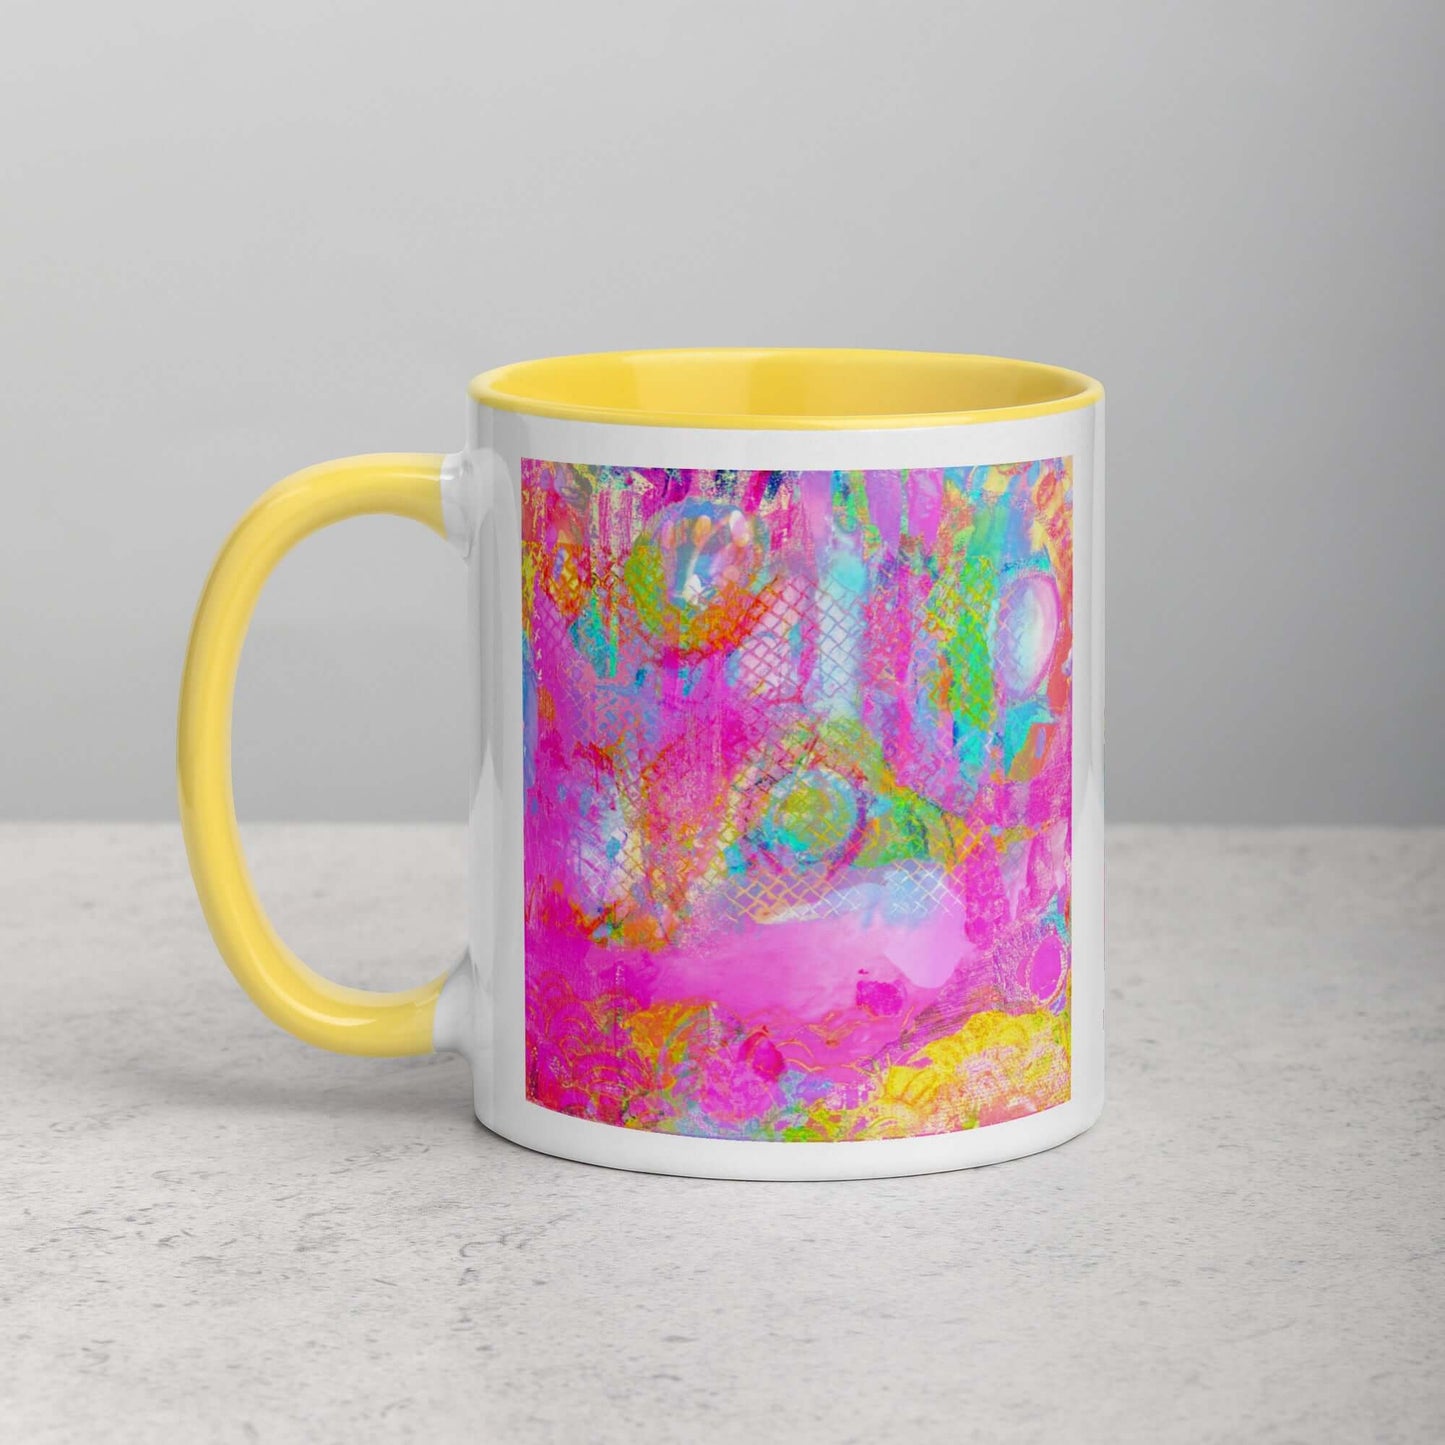  Drippy Pink “Candyland” Abstract Art Mug with Bright Yellow Color Inside Left Handed Front View